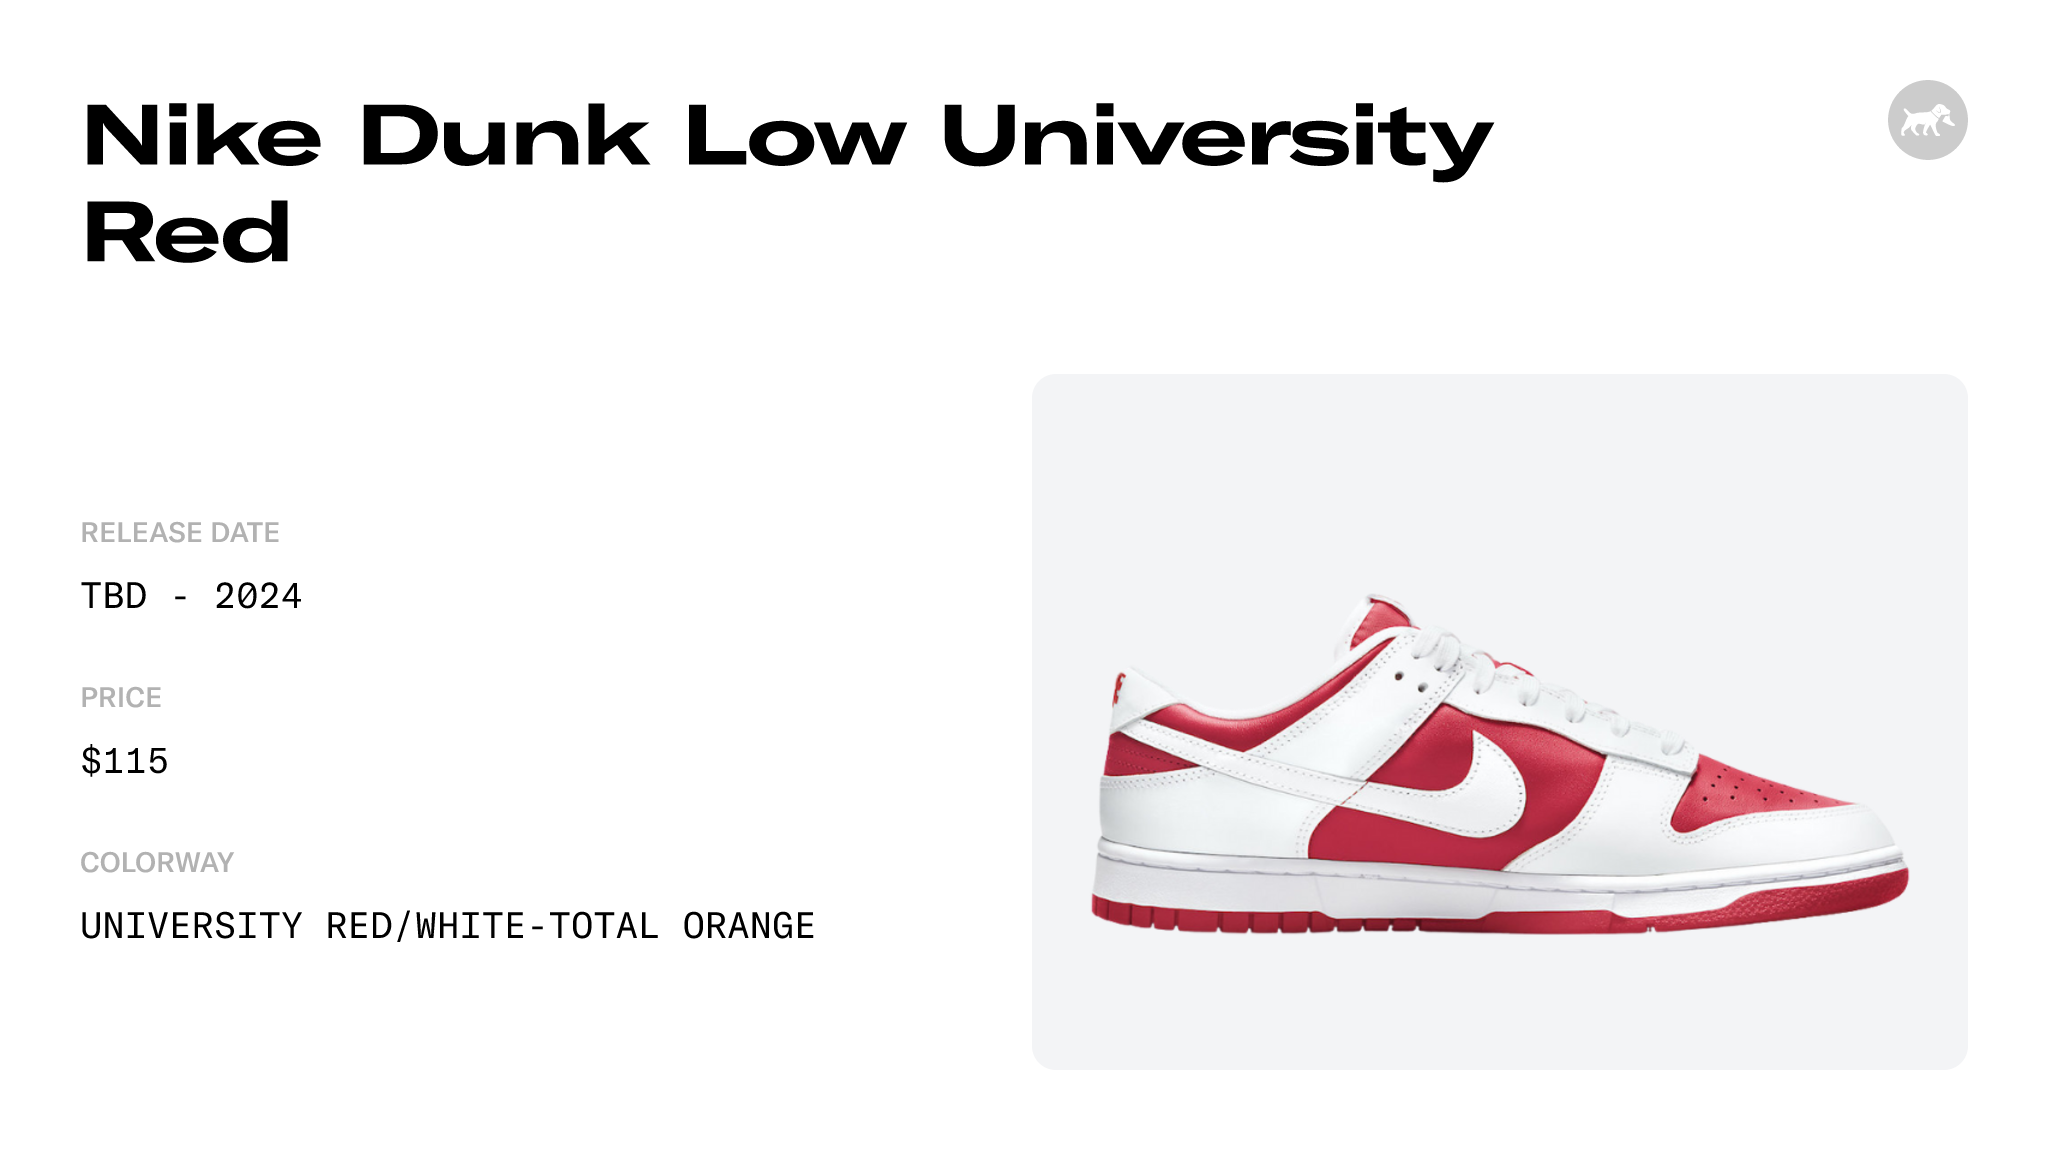 Nike Dunk Low University Red - DD1391-600 Raffles and Release Date